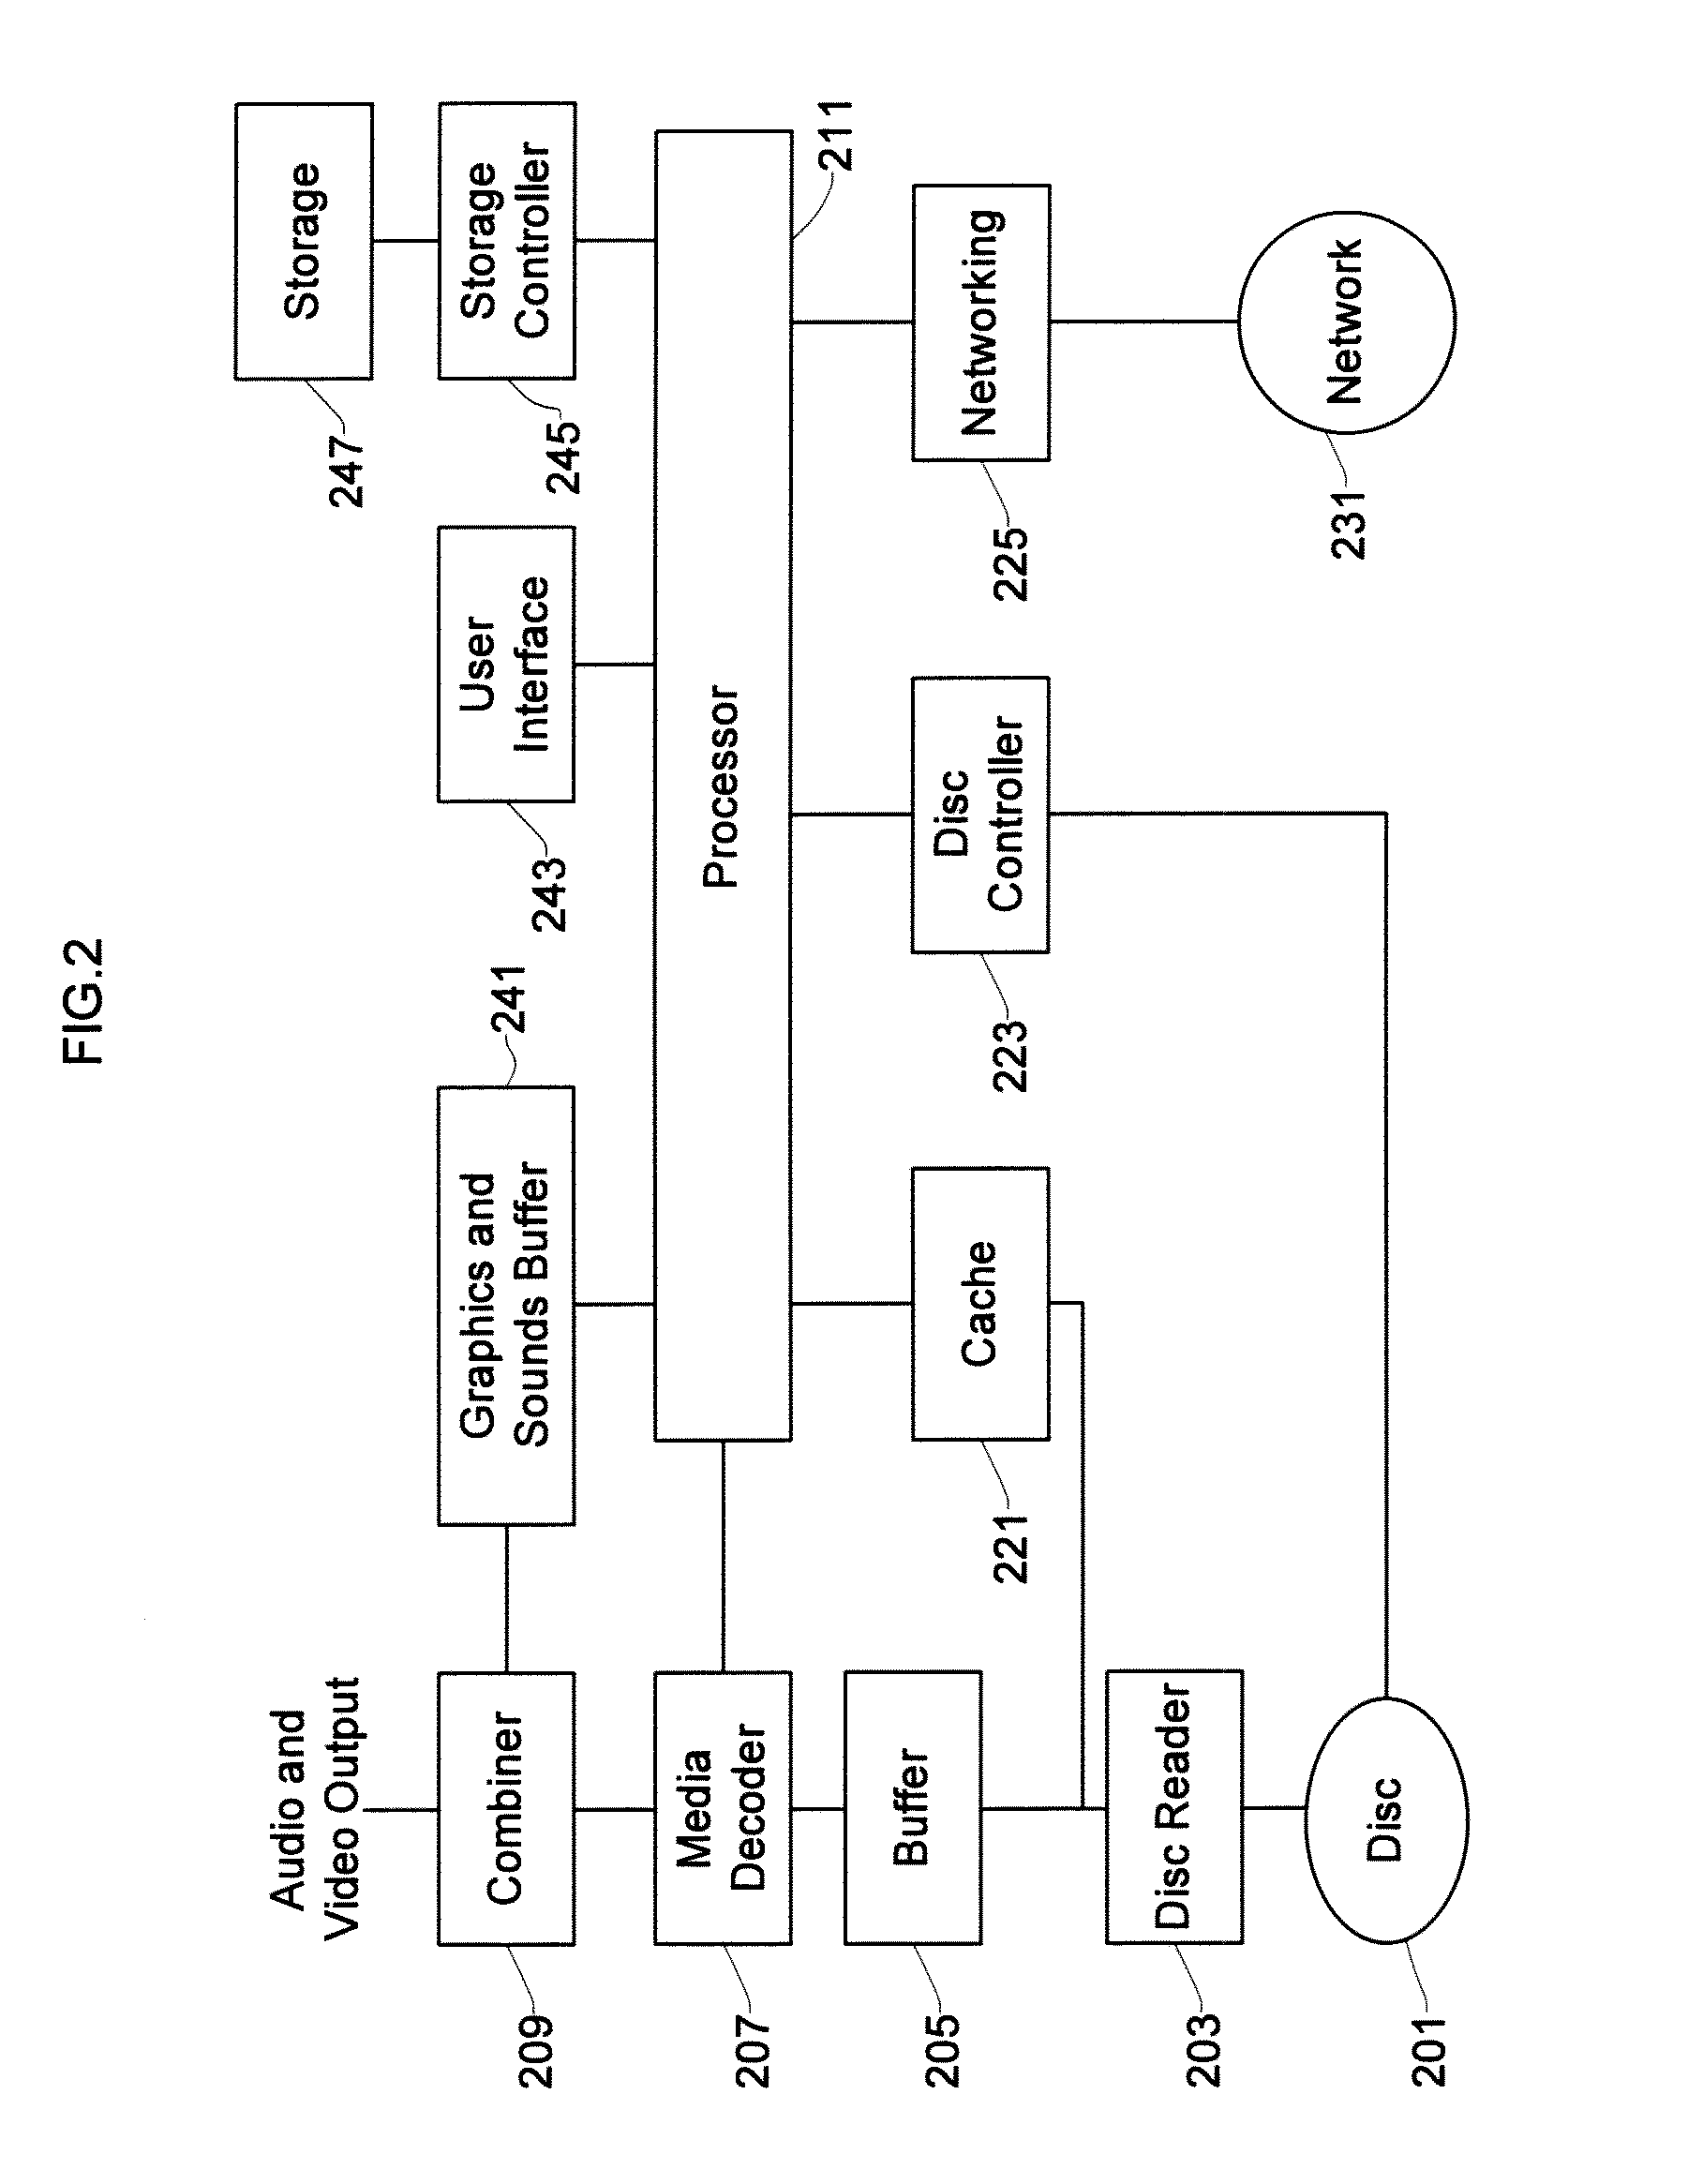 Music game software and input device utilizing a video player